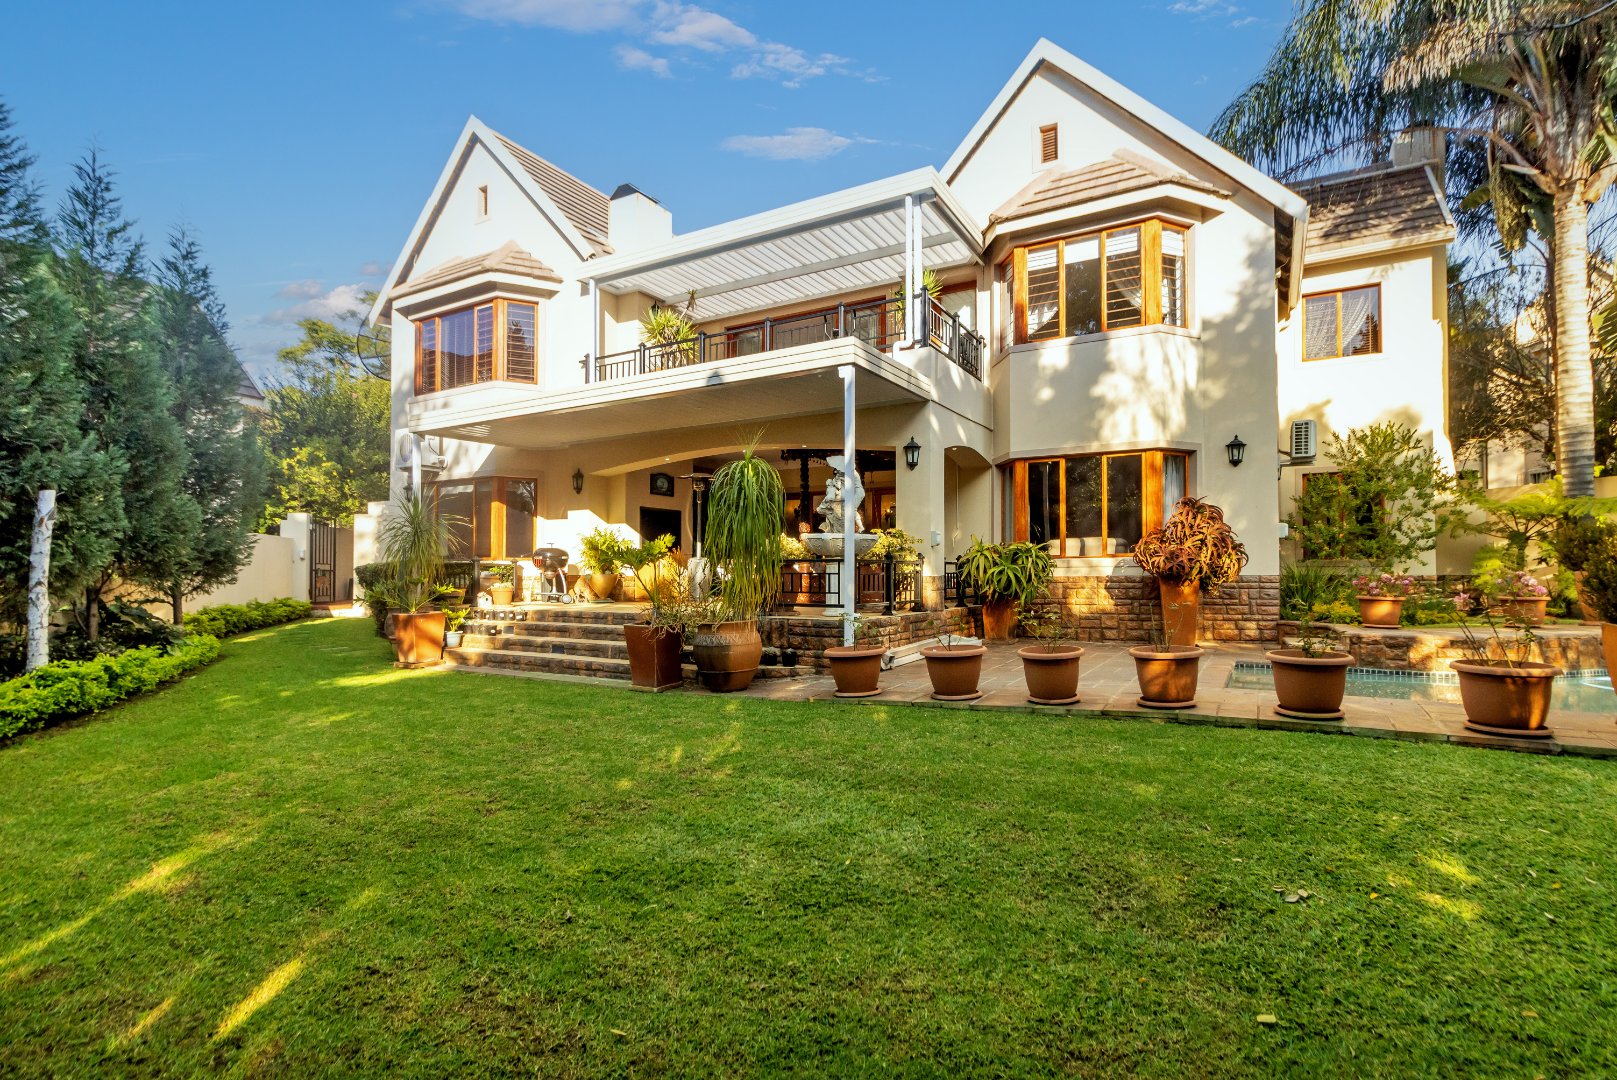 Classic & Stylish 5 Bedroom House For Sale in Bryanston